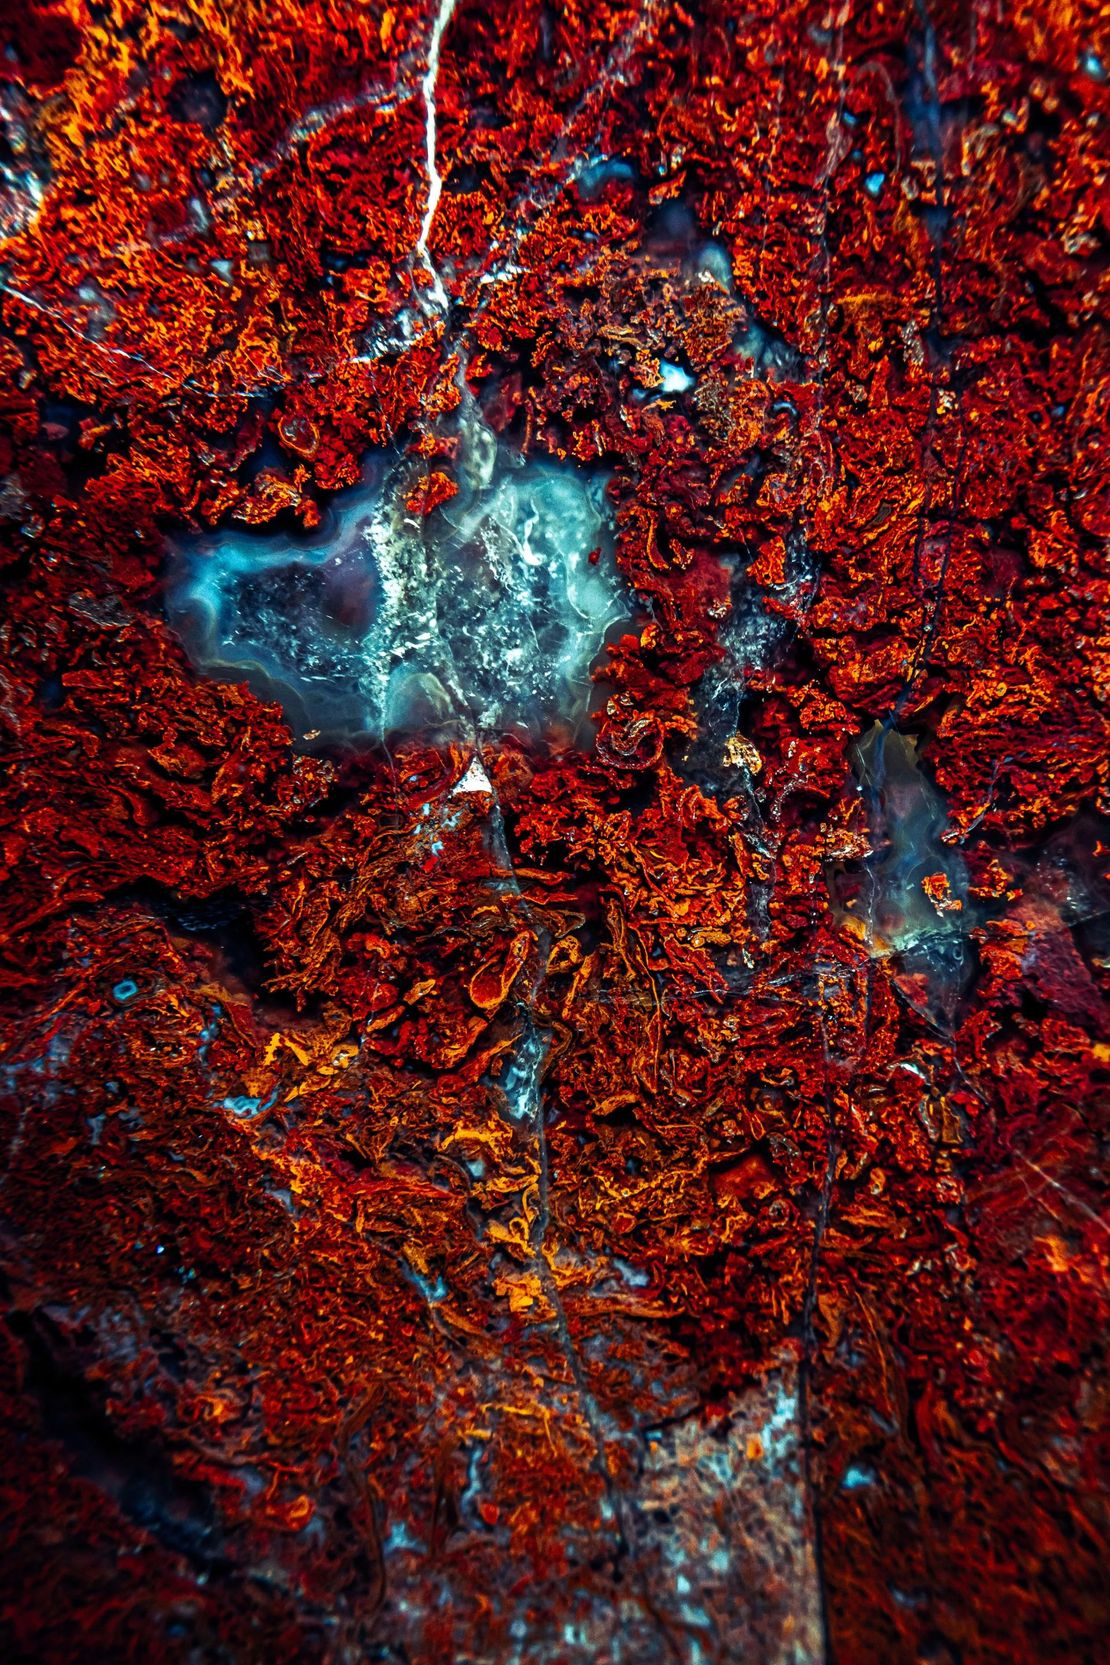 A close up of a red rock with a blue glow in the dark.